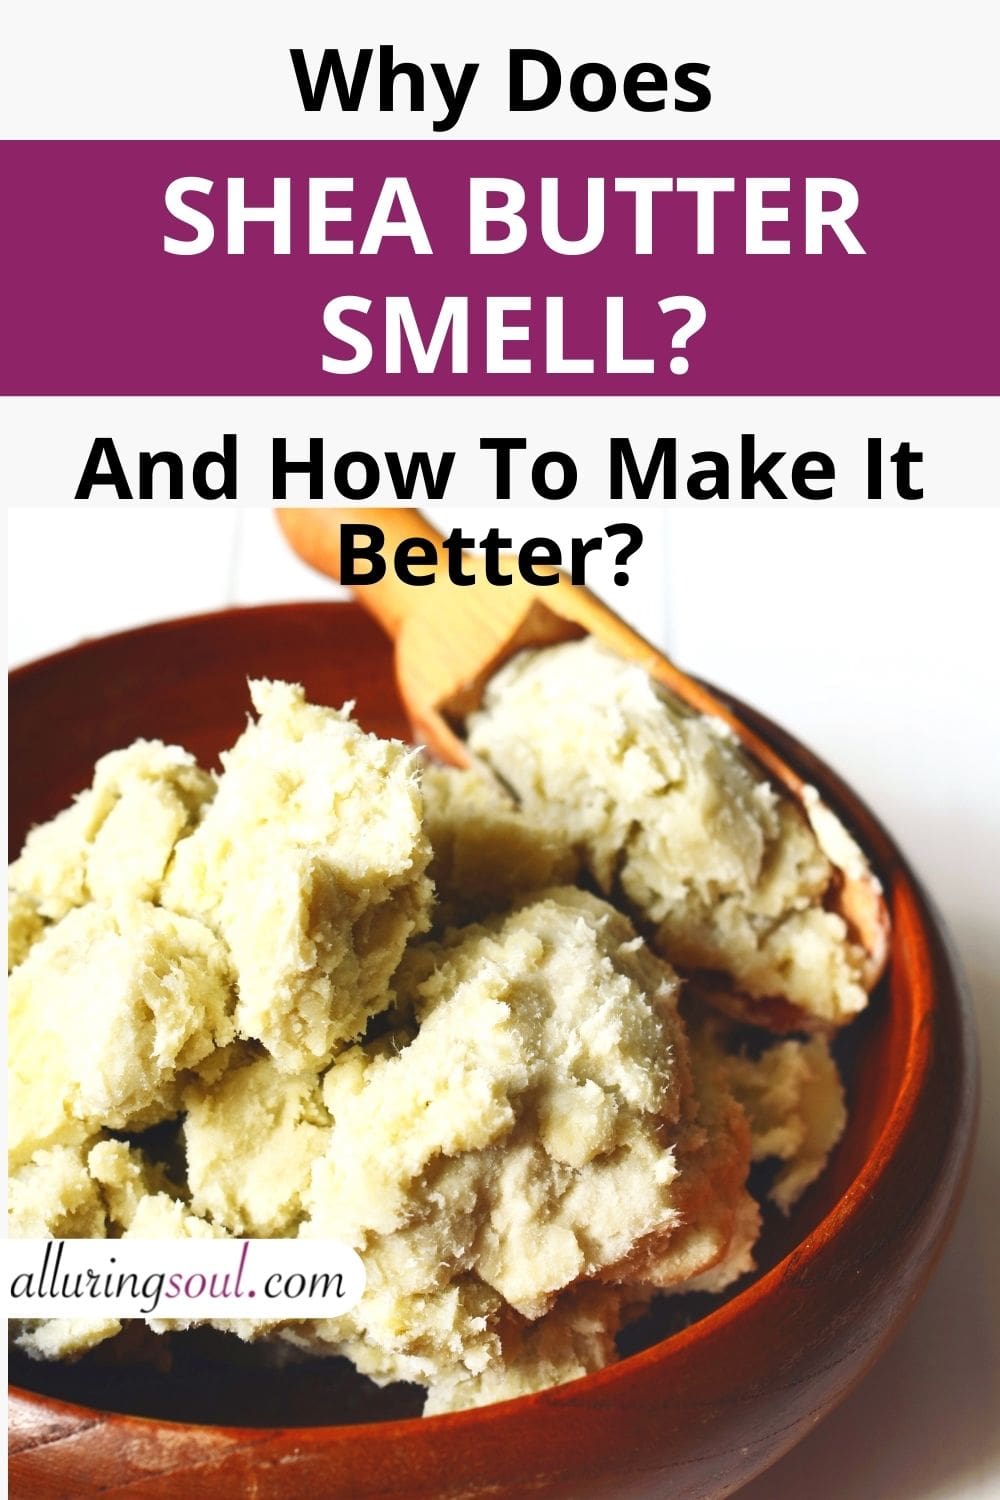 Why Does Shea Butter Smell? (And How To Make It Better?)